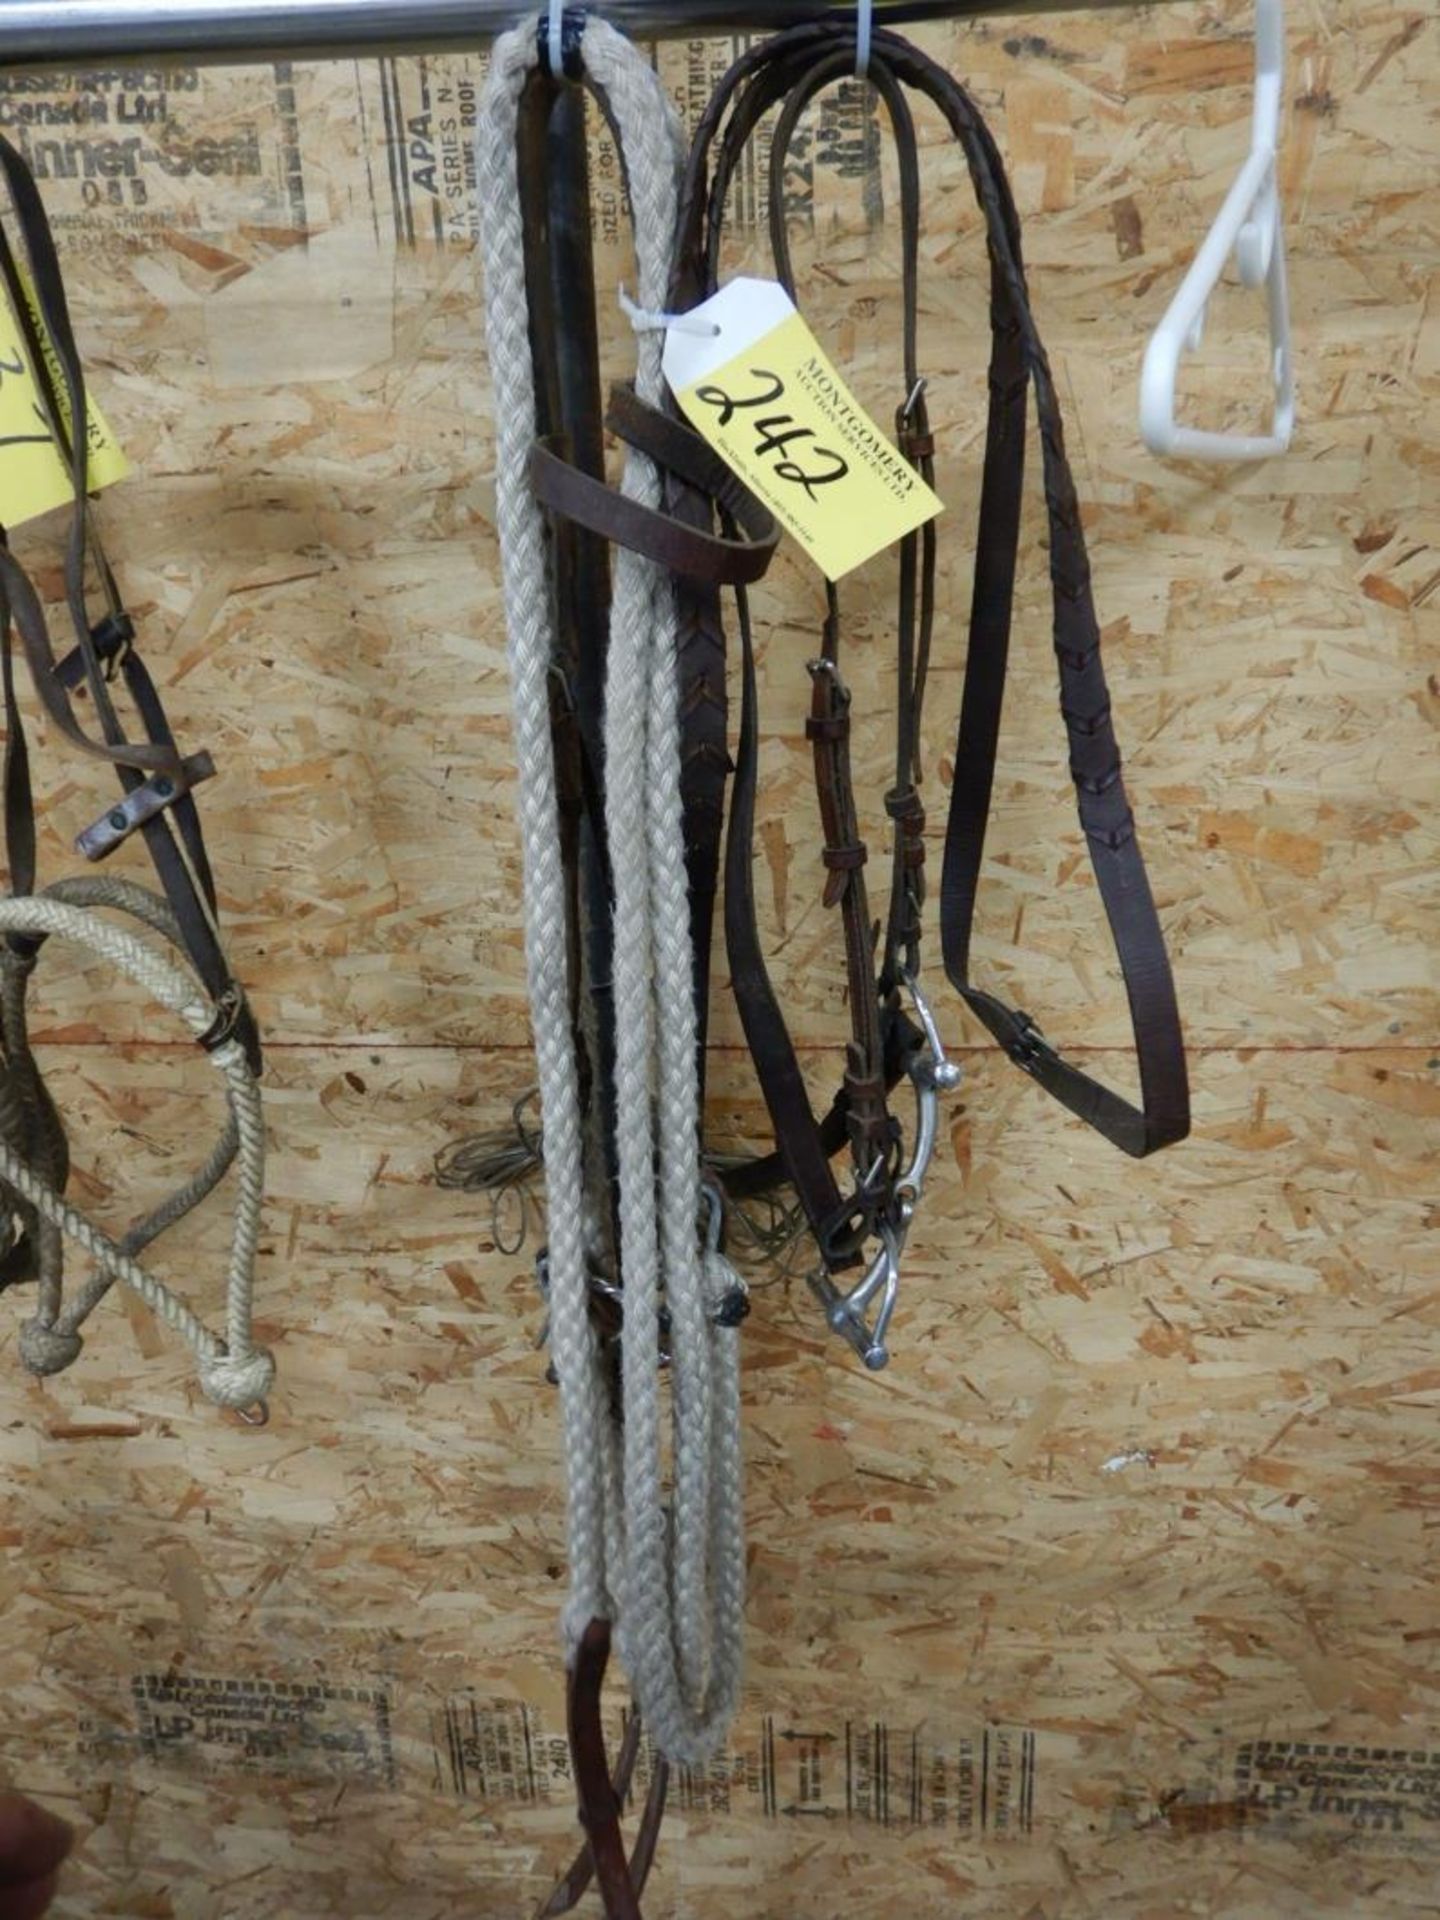 EAR BRIDLE W/ TWISTED WIRE SNAFFLE, EAR BRIDLE W/ D-RING SNAFFLE